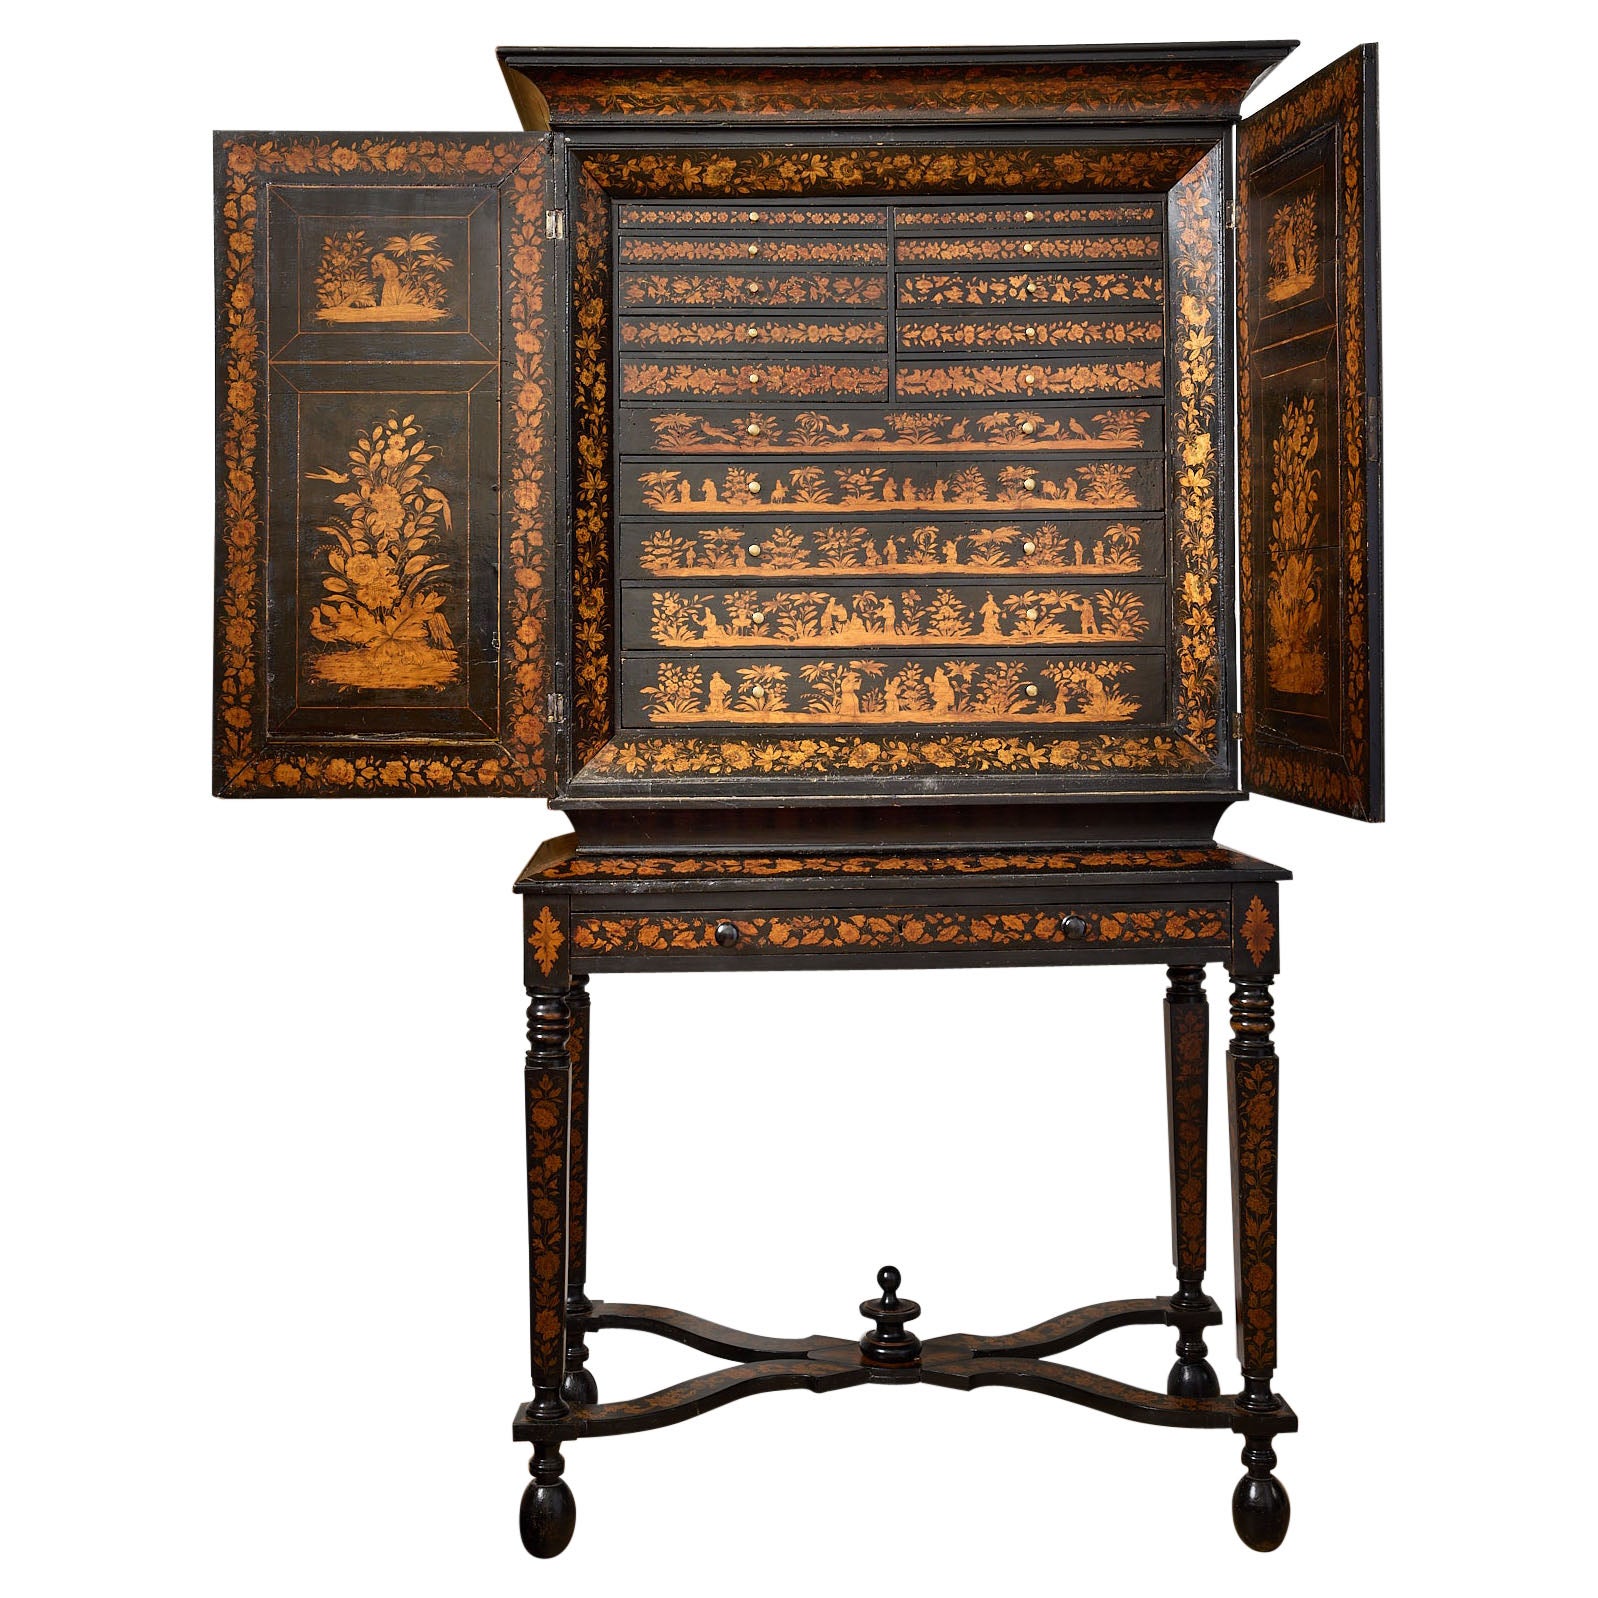 Rare Regency  Penwork Collectors Cabinet on Stand, Chinoiserie